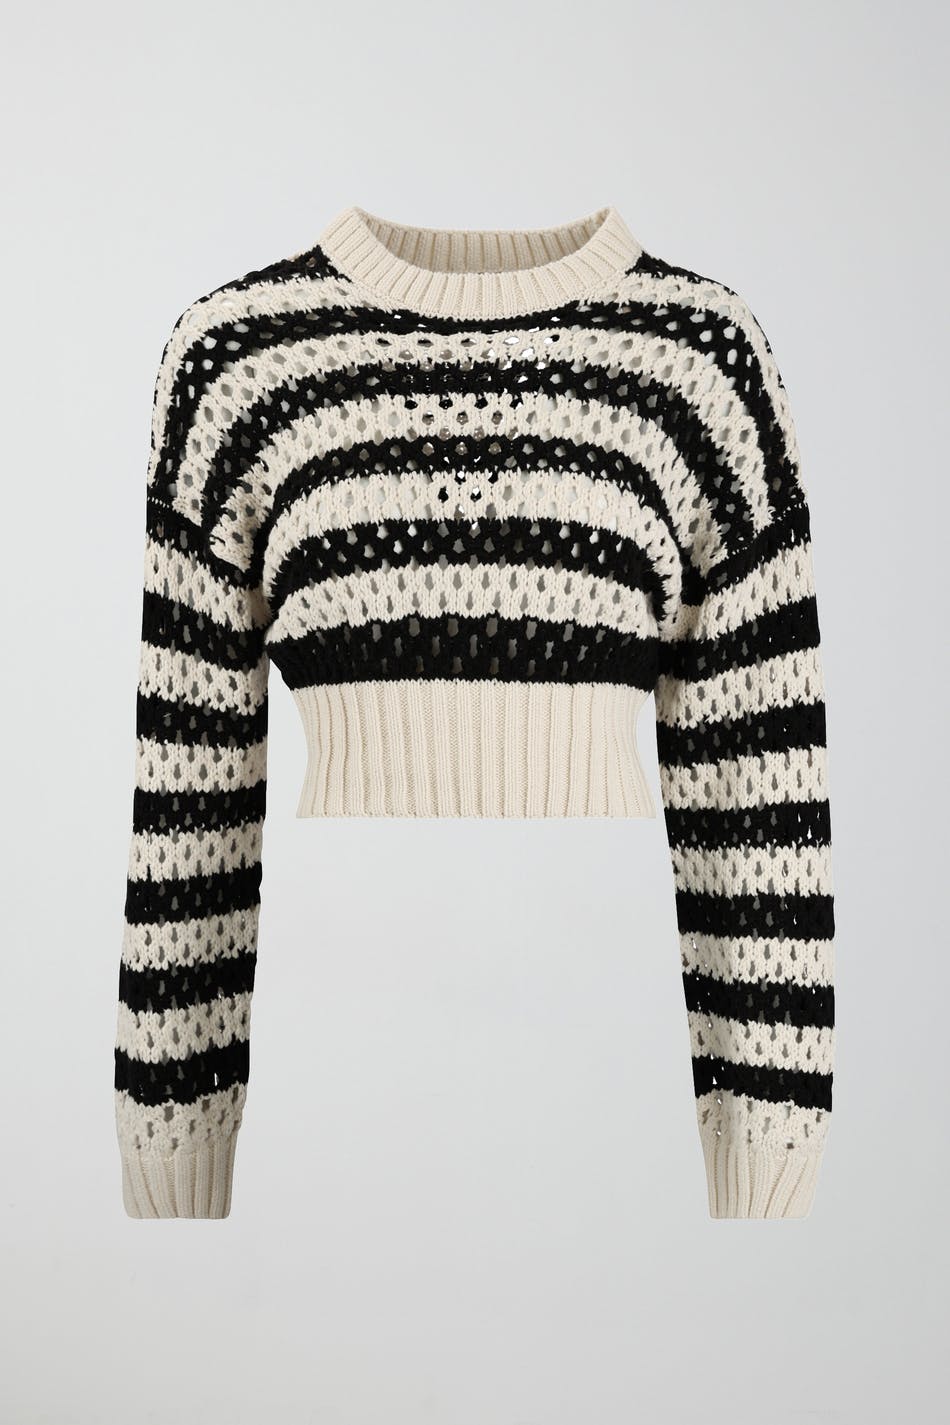 ginatricot.com | Knitted sweater